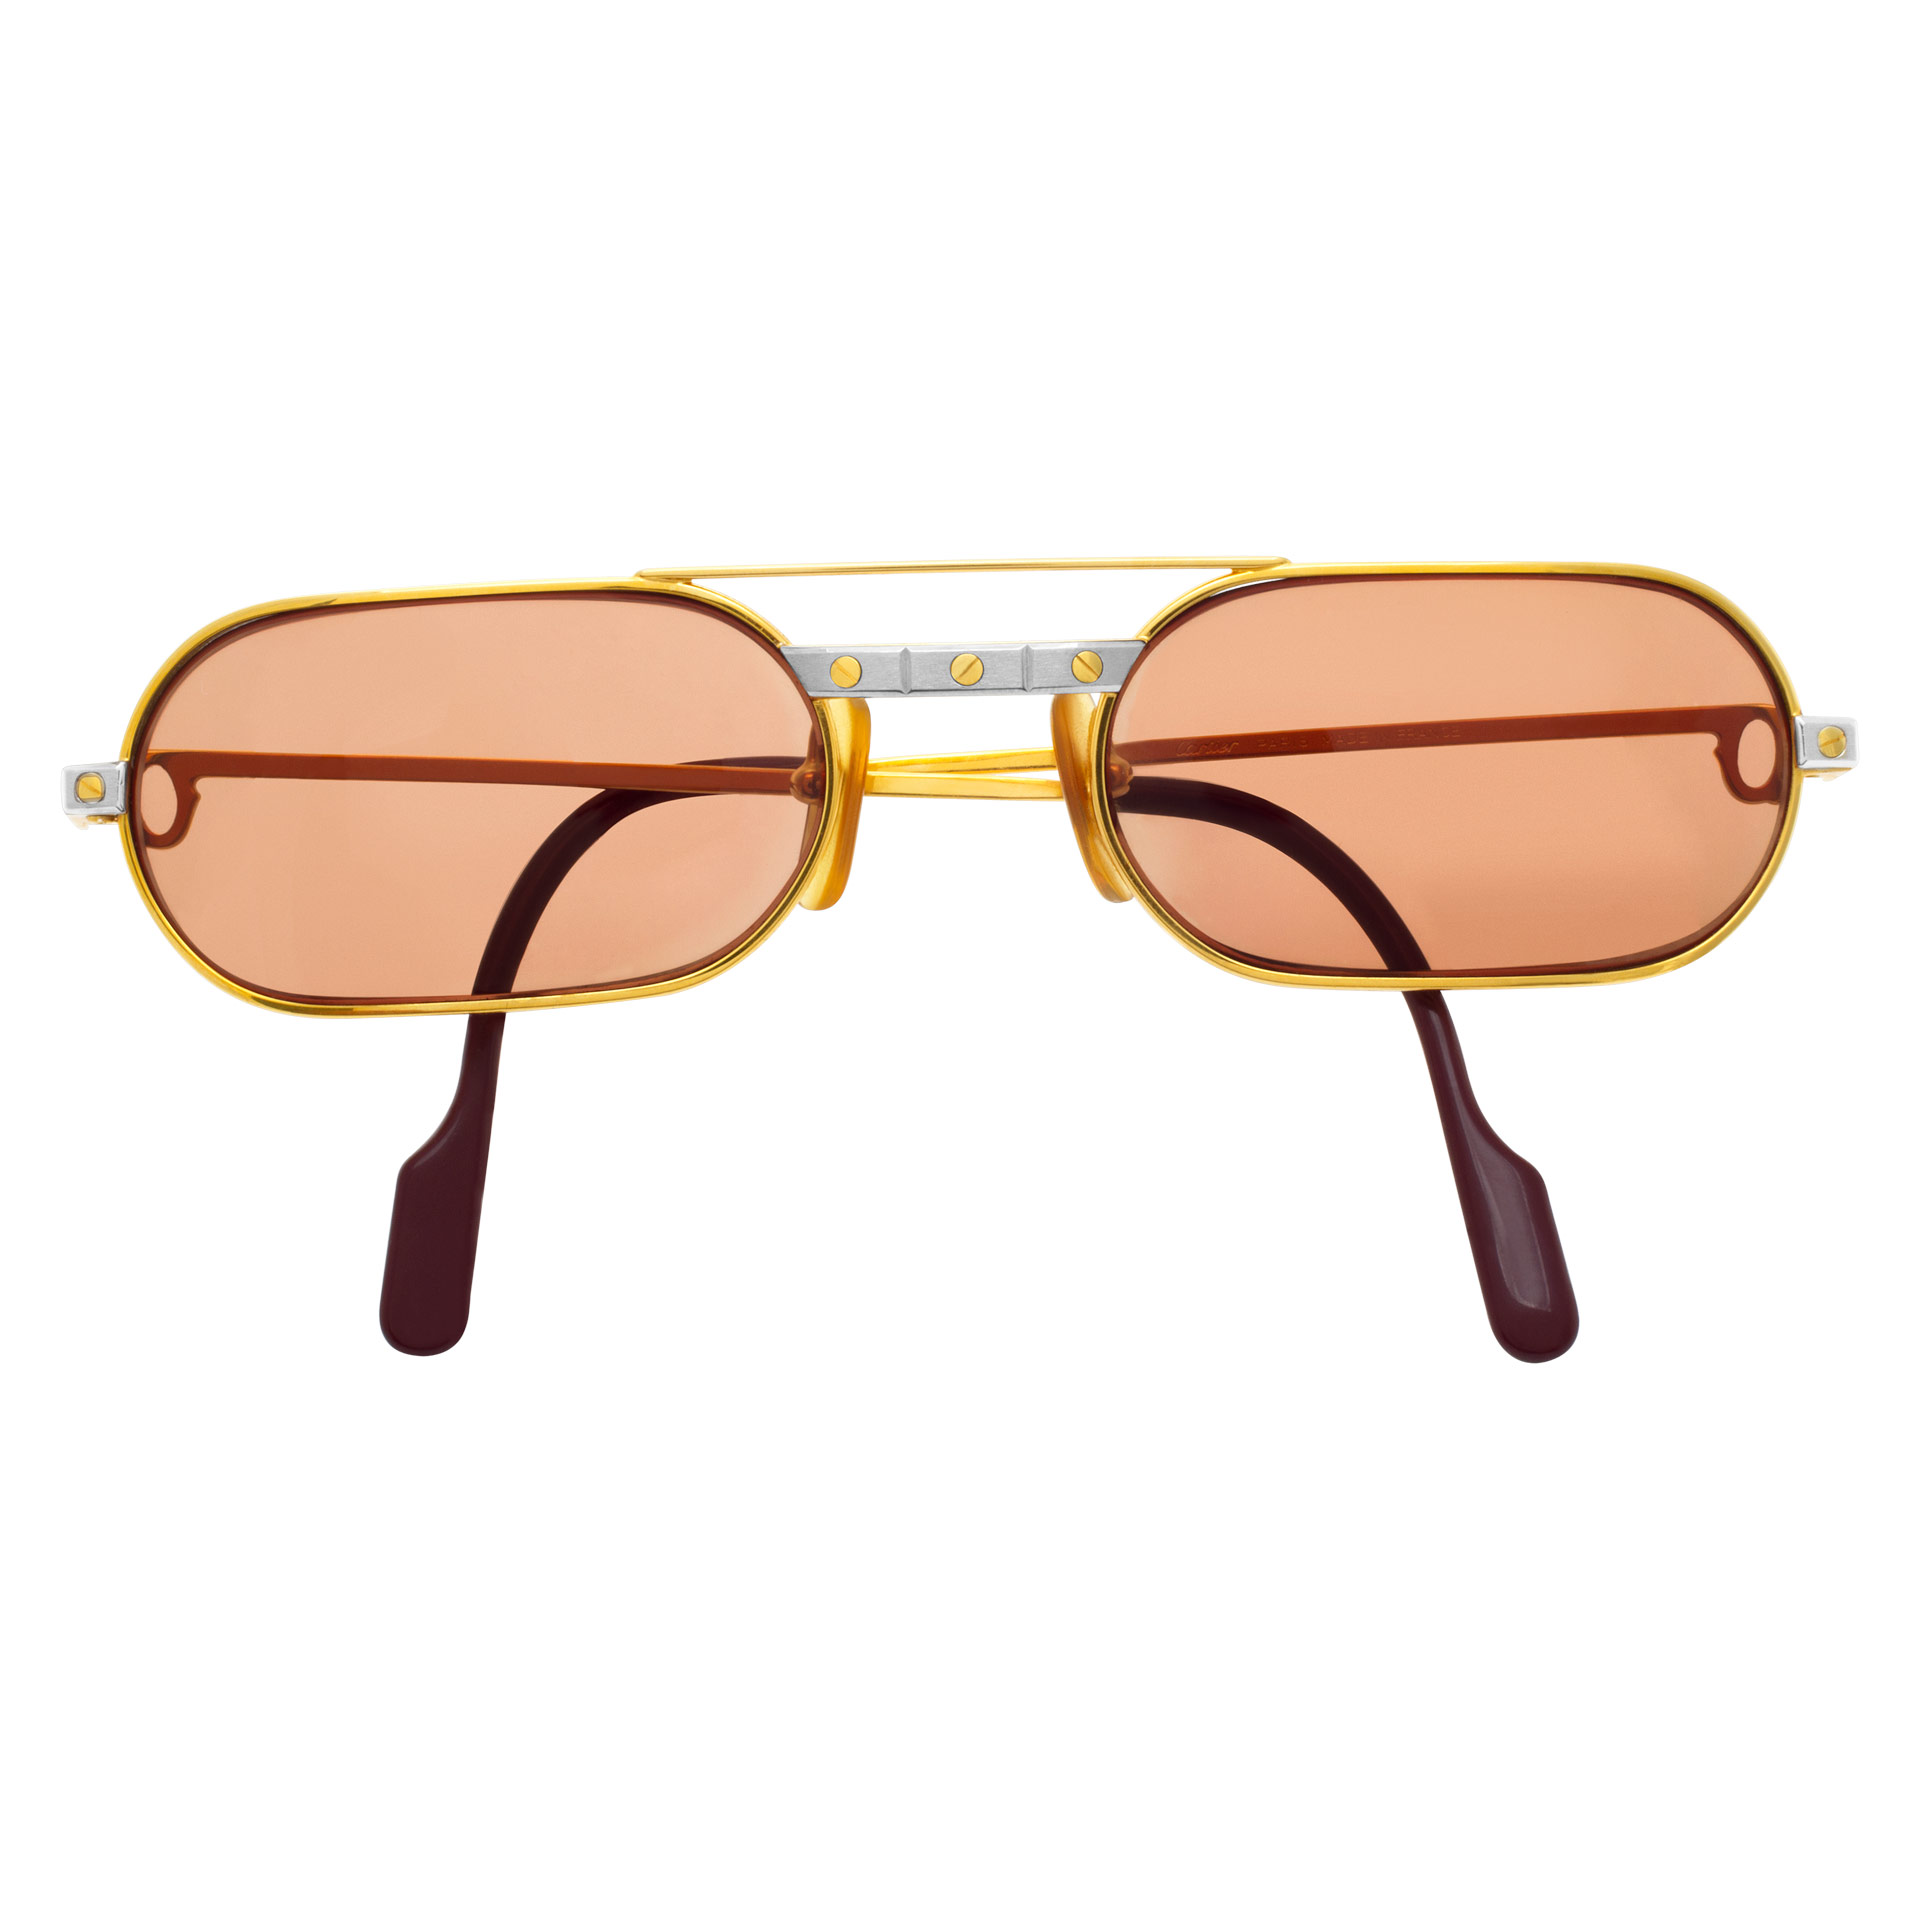 Cartier Santos glasses in gold plate image 1